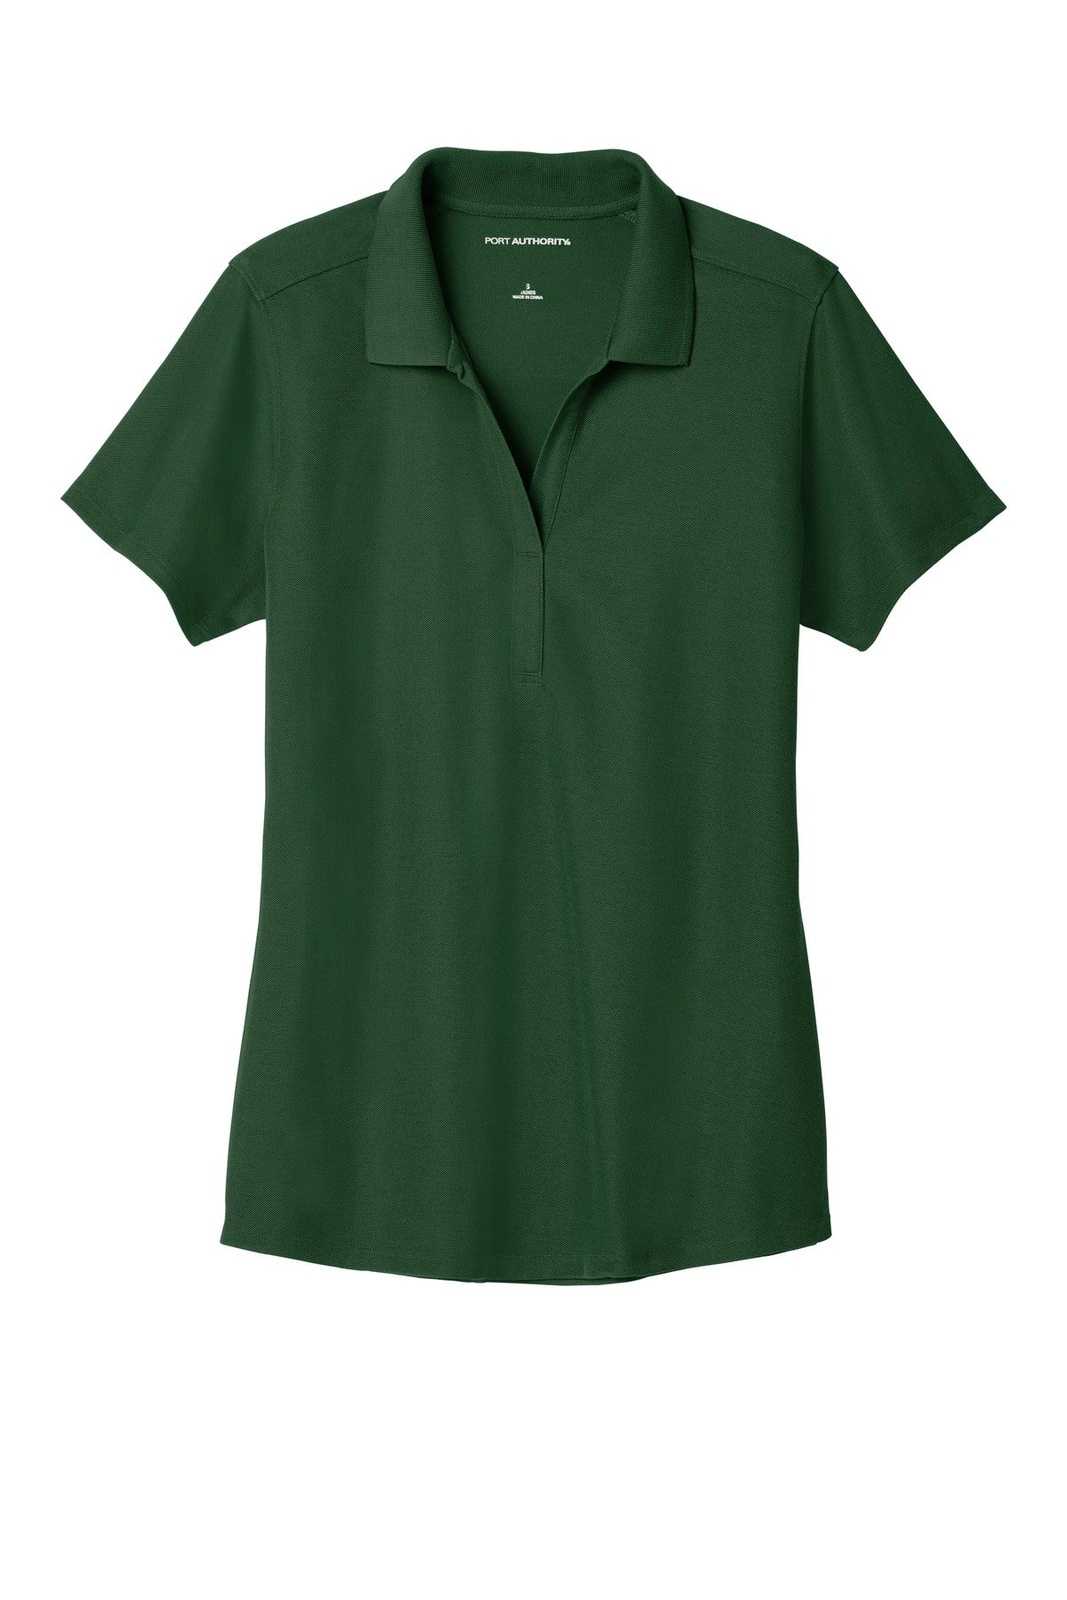 Port Authority LK600 Ladies Ezperformance Pique Polo - Deep Forest Green - HIT a Double - 5